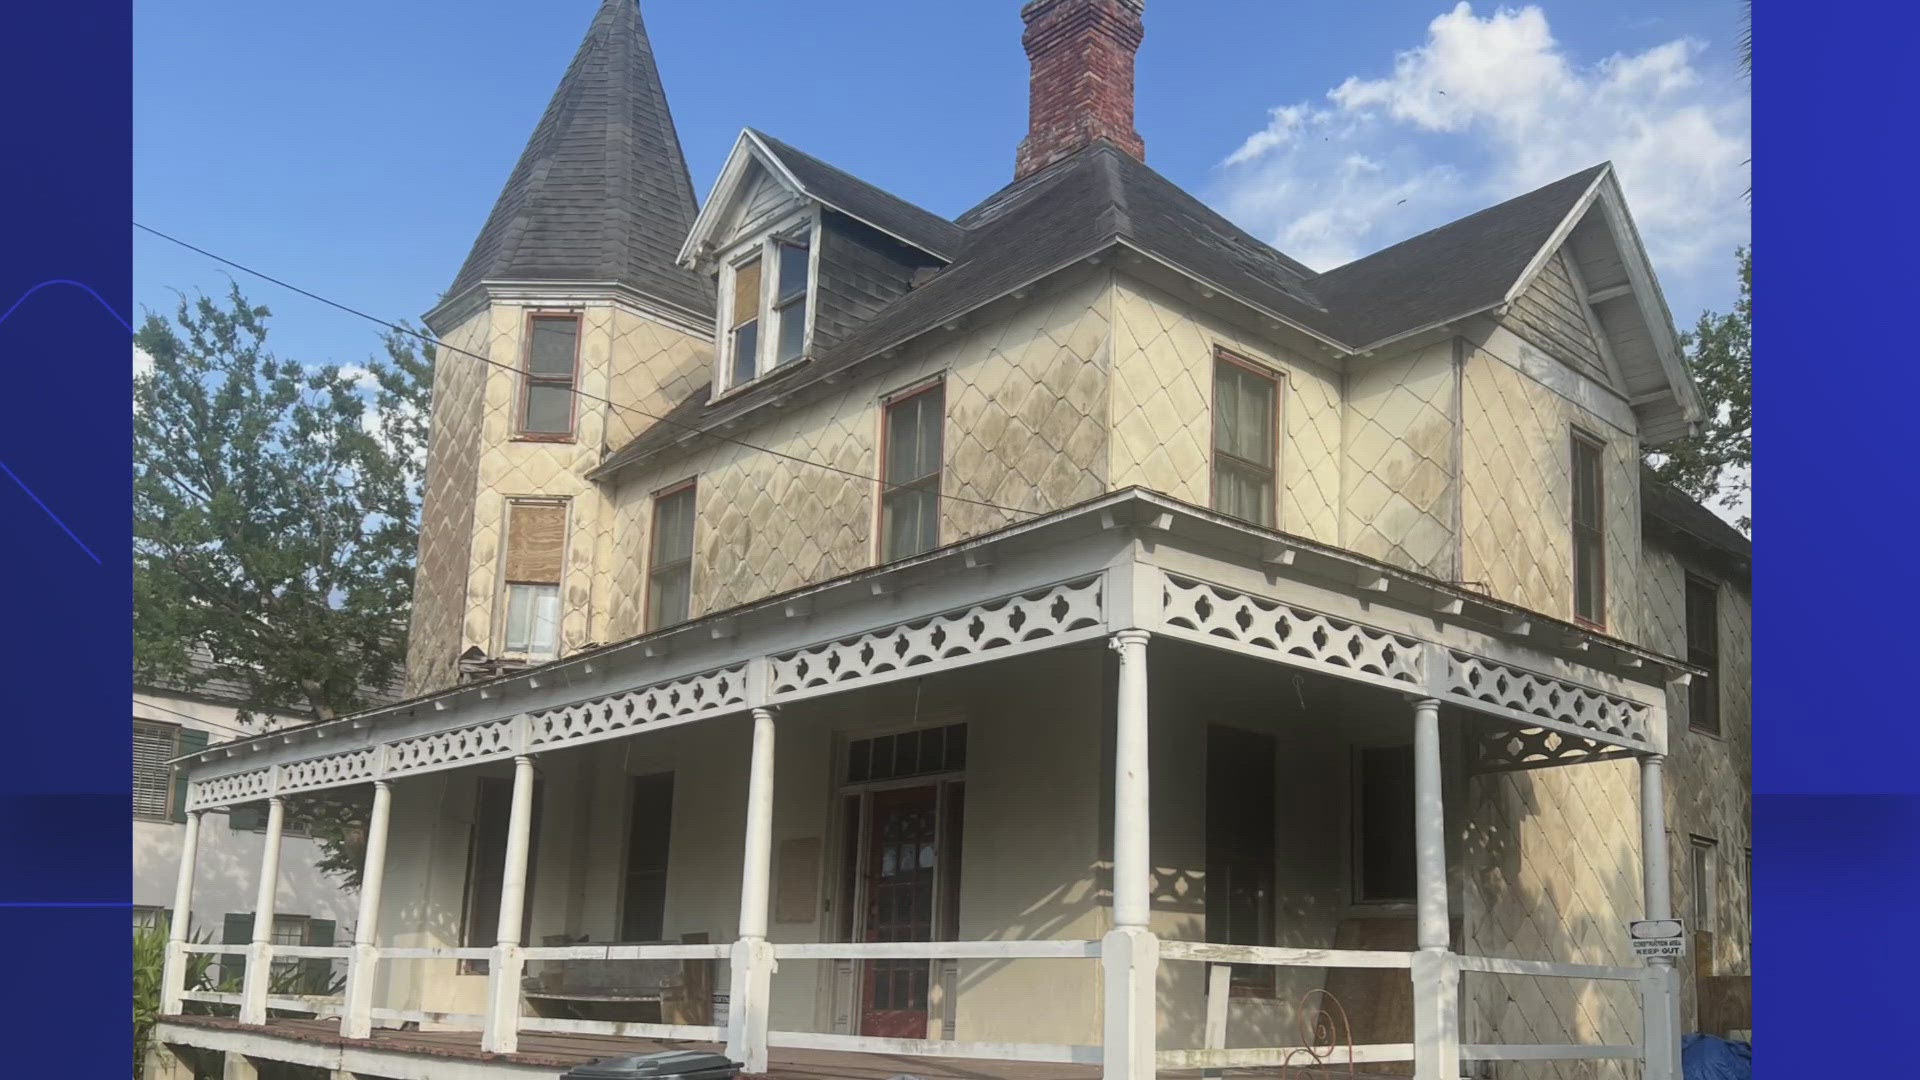 The demolition of the historic 1800's home at 11 Bridge Street has sparked controversy. The City Commission is working on solutions to prevent a repeat incident.